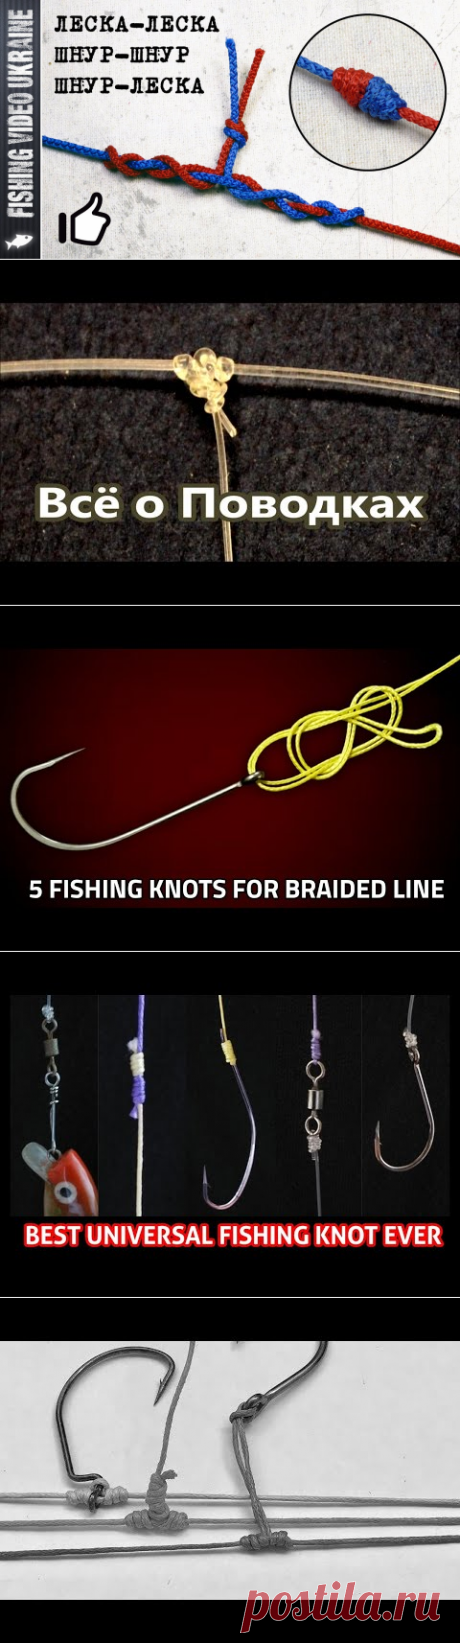 Just 1 Knot You Need For Fishing - YouTube